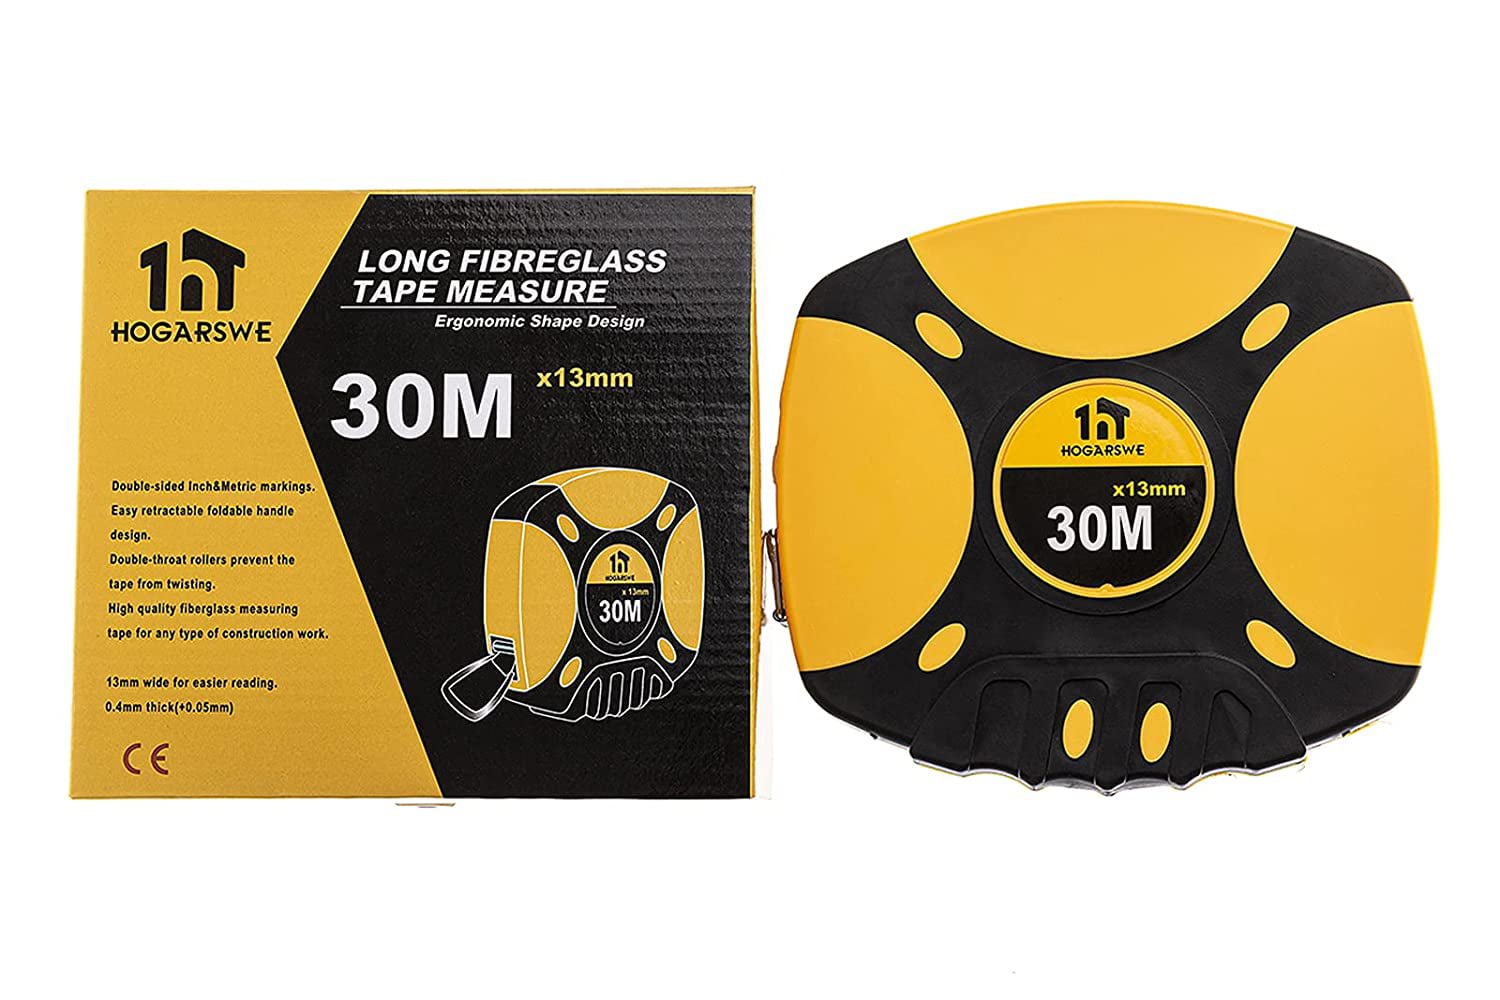 HOGARSWE Long Fiberglass Tape Measure Closed Reel Measuring Tape,100FT/30M by 1/2-Inch,Inch/Metric Scale for Construction Work 100FT 